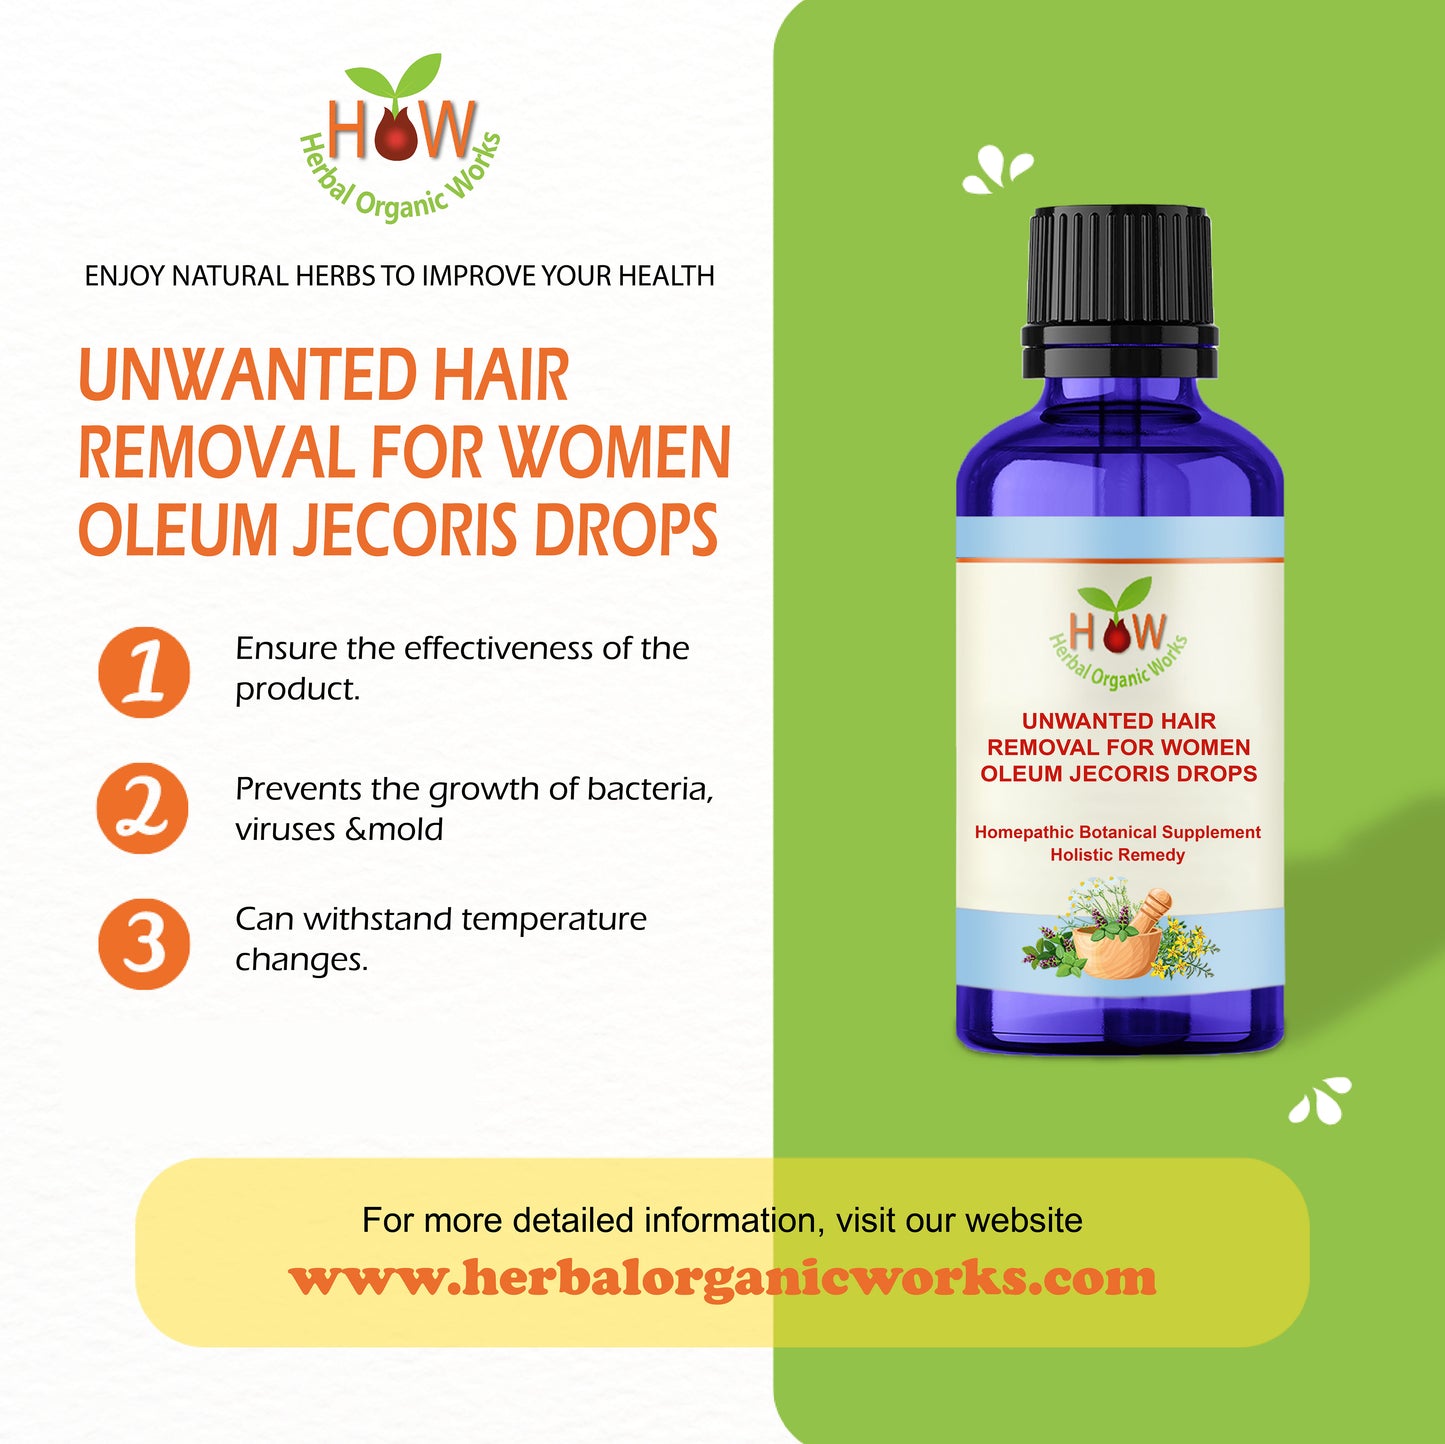 UNWANTED HAIR REMOVAL FOR WOMEN OLEUM JECORIS DROPS